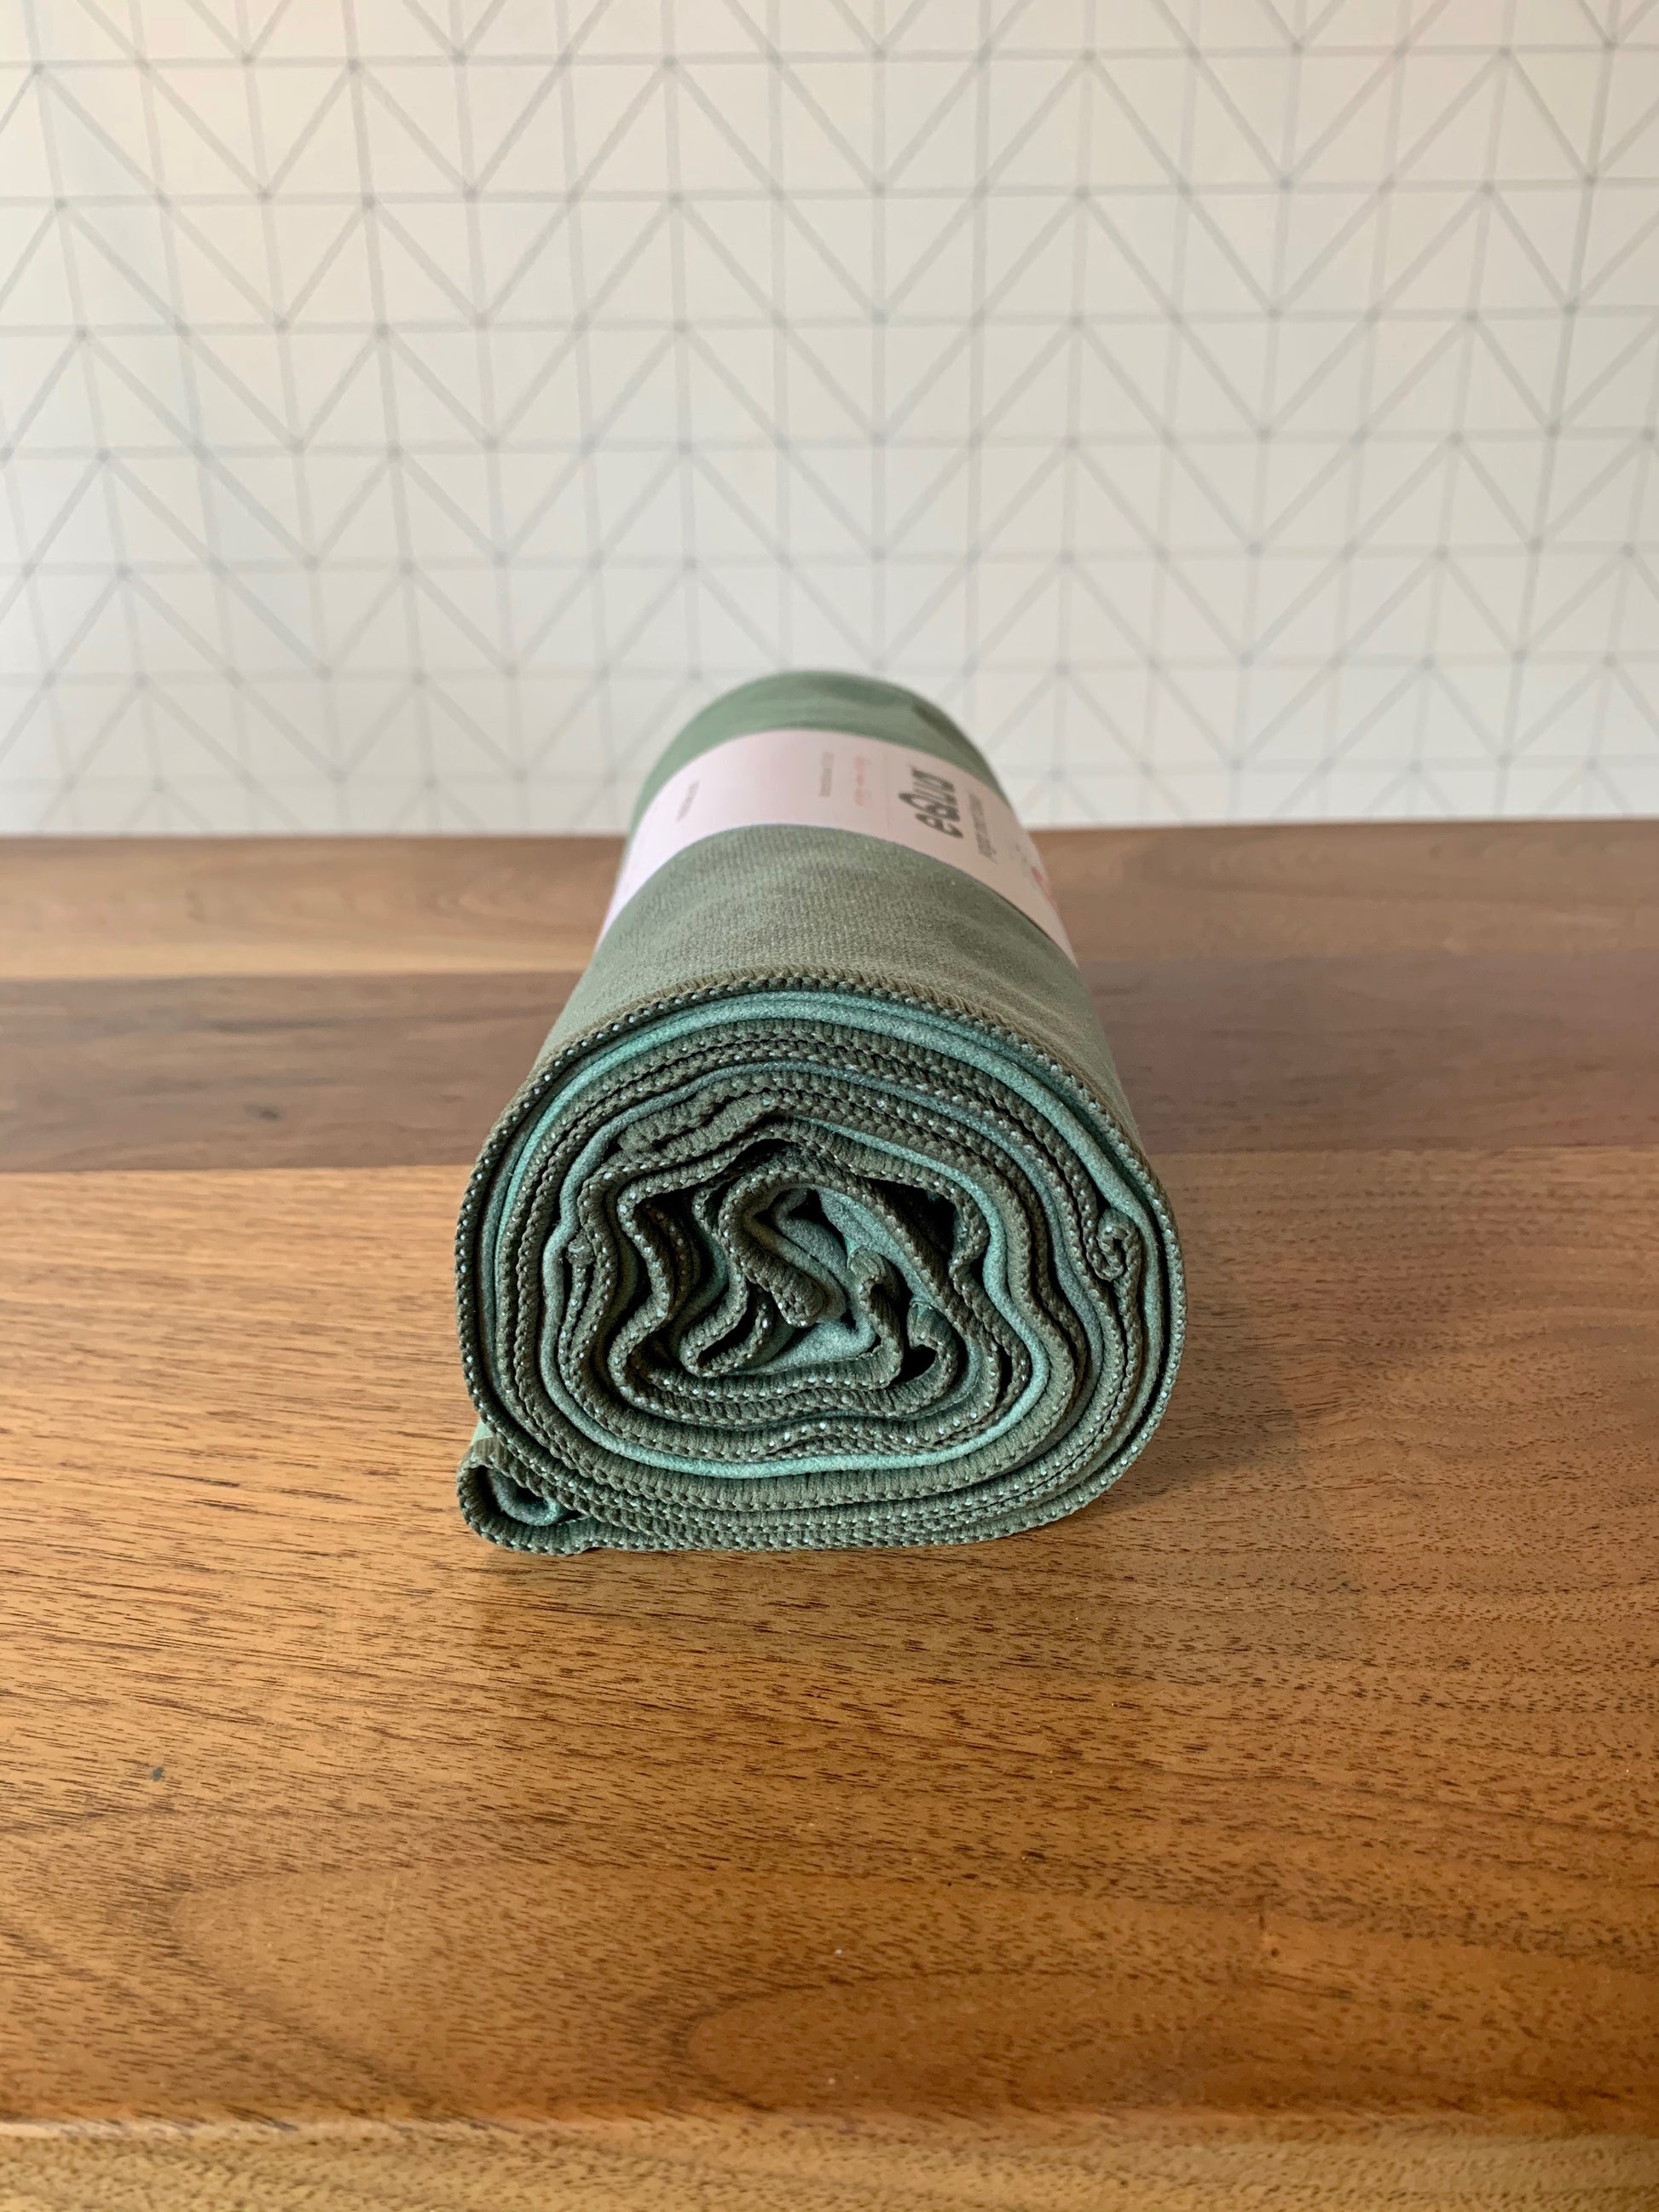 Manduka eQua Yoga Mat Towel, Non-Slip, Quick Drying Microfiber, Thin and  Lightweight, Eco-Friendly. Great for Gym, Pilates, Outdoor Fitness, or Any